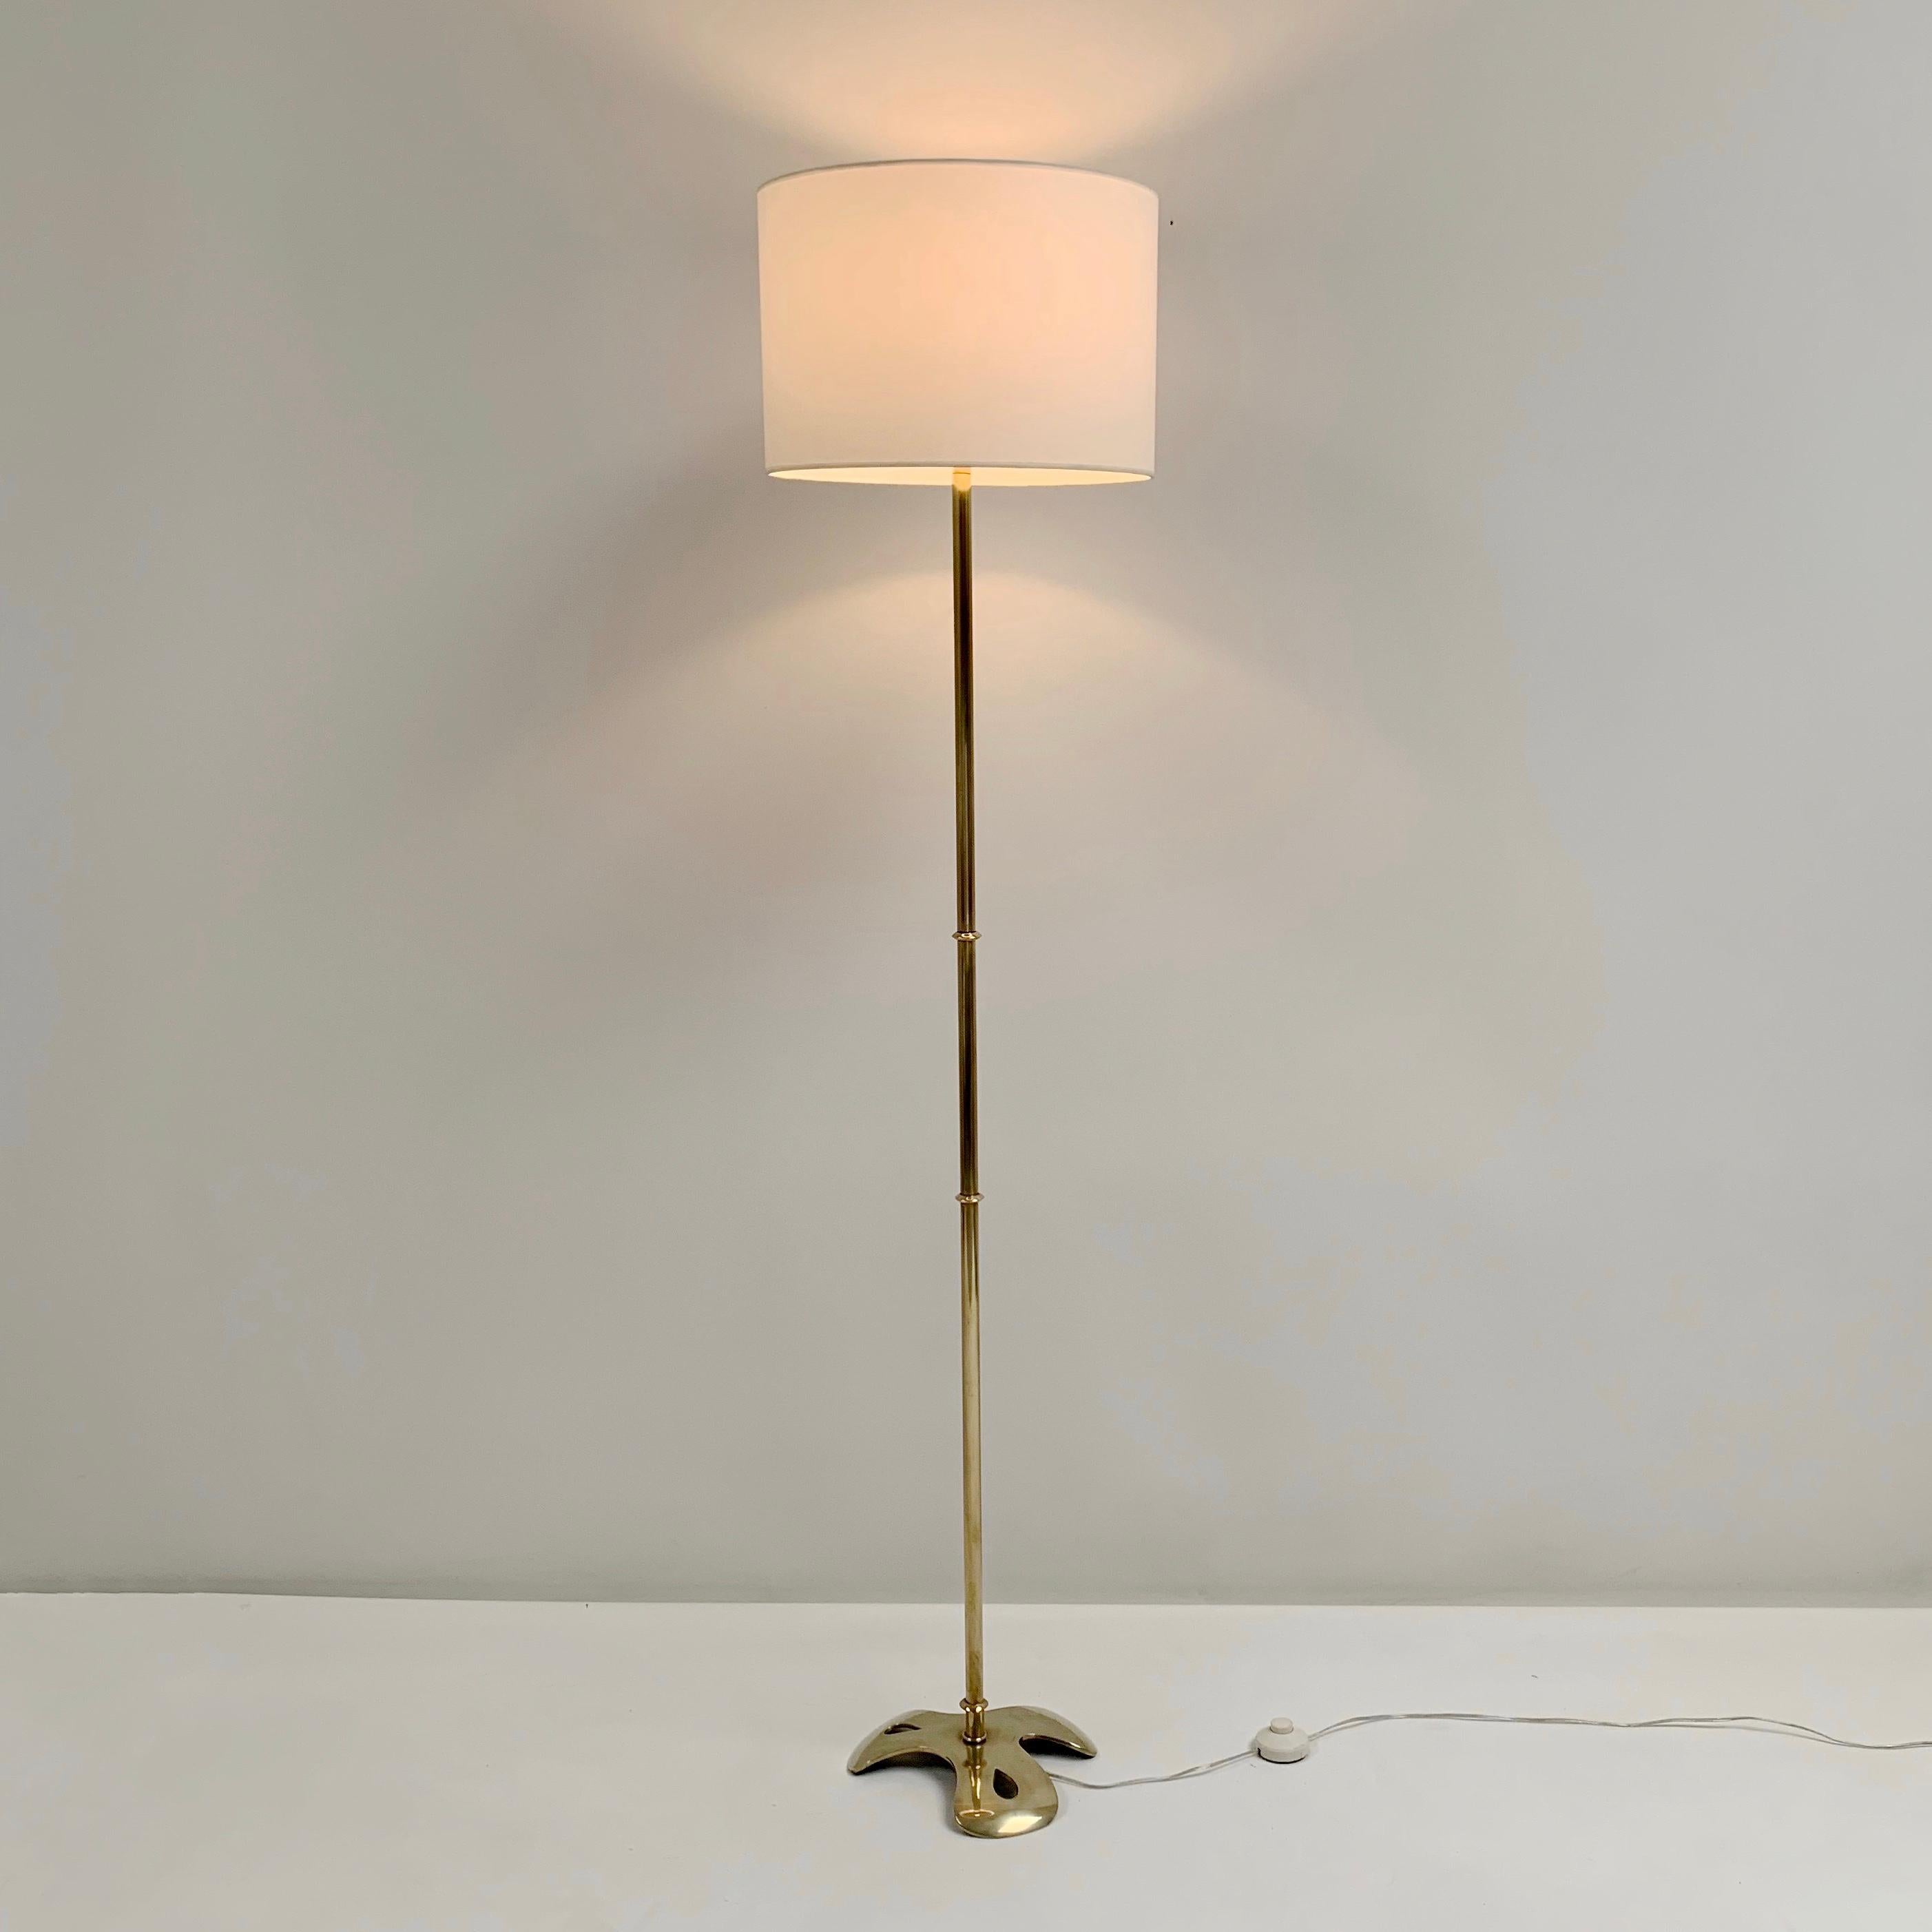 Rare model of Scarpa floor lamp, circa 1960, France.
Signed on the base Scarpa.
A very chic floor lamp with an interesting base design.
Polished brass, new fabric shade.
Rewired.
Dimensions: 170 cm total height, diameter of the base: 28 cm, diameter